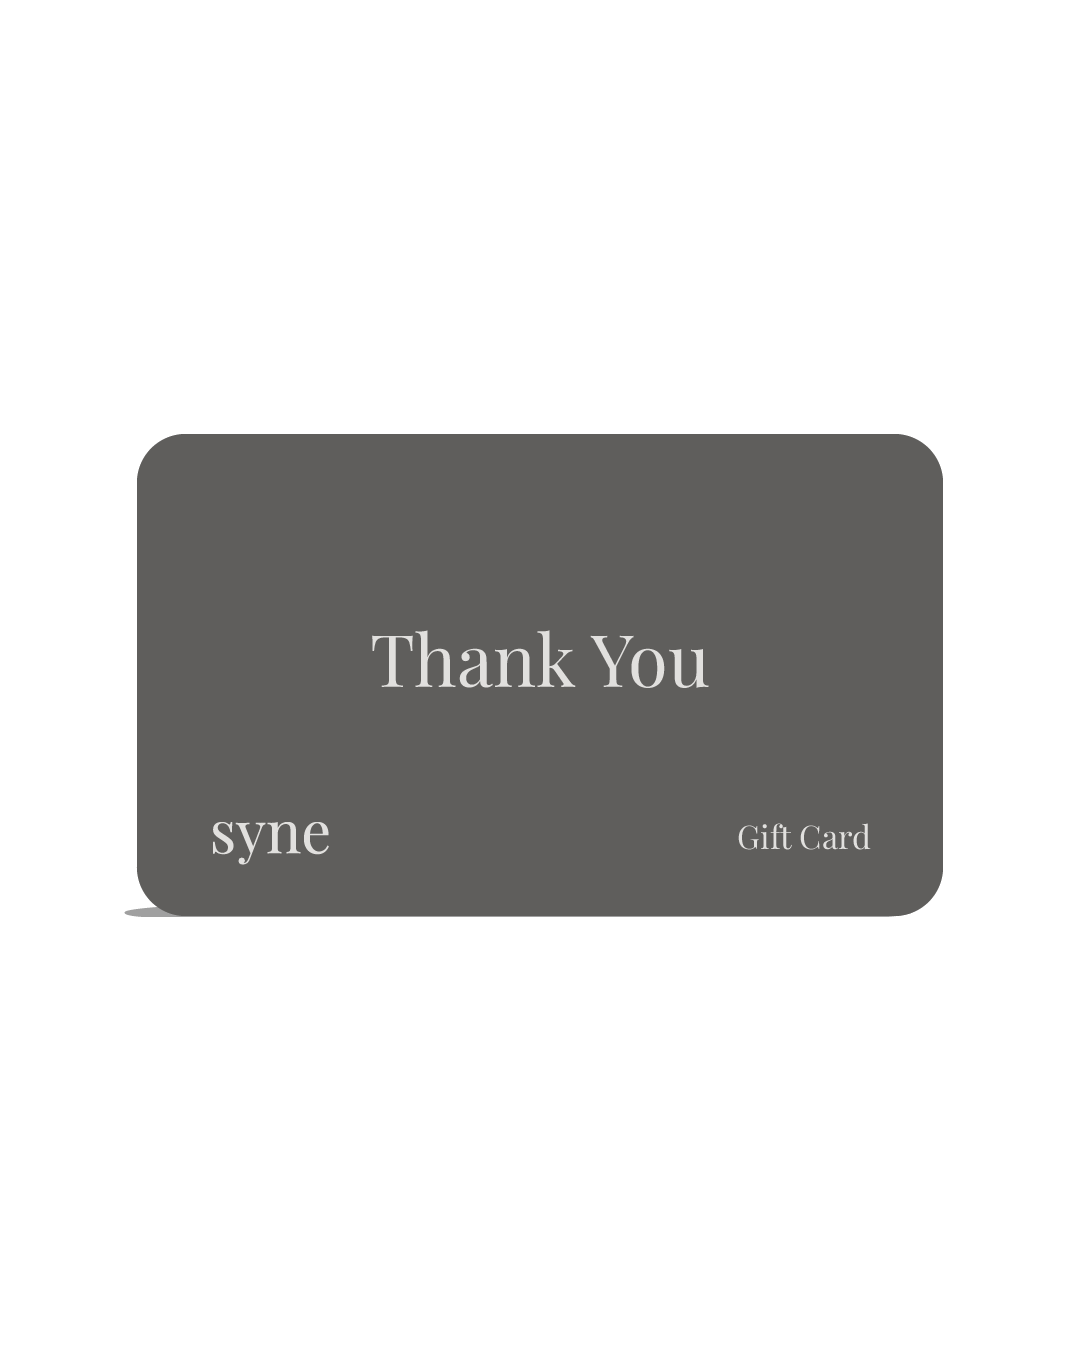 Thank You Gift Card